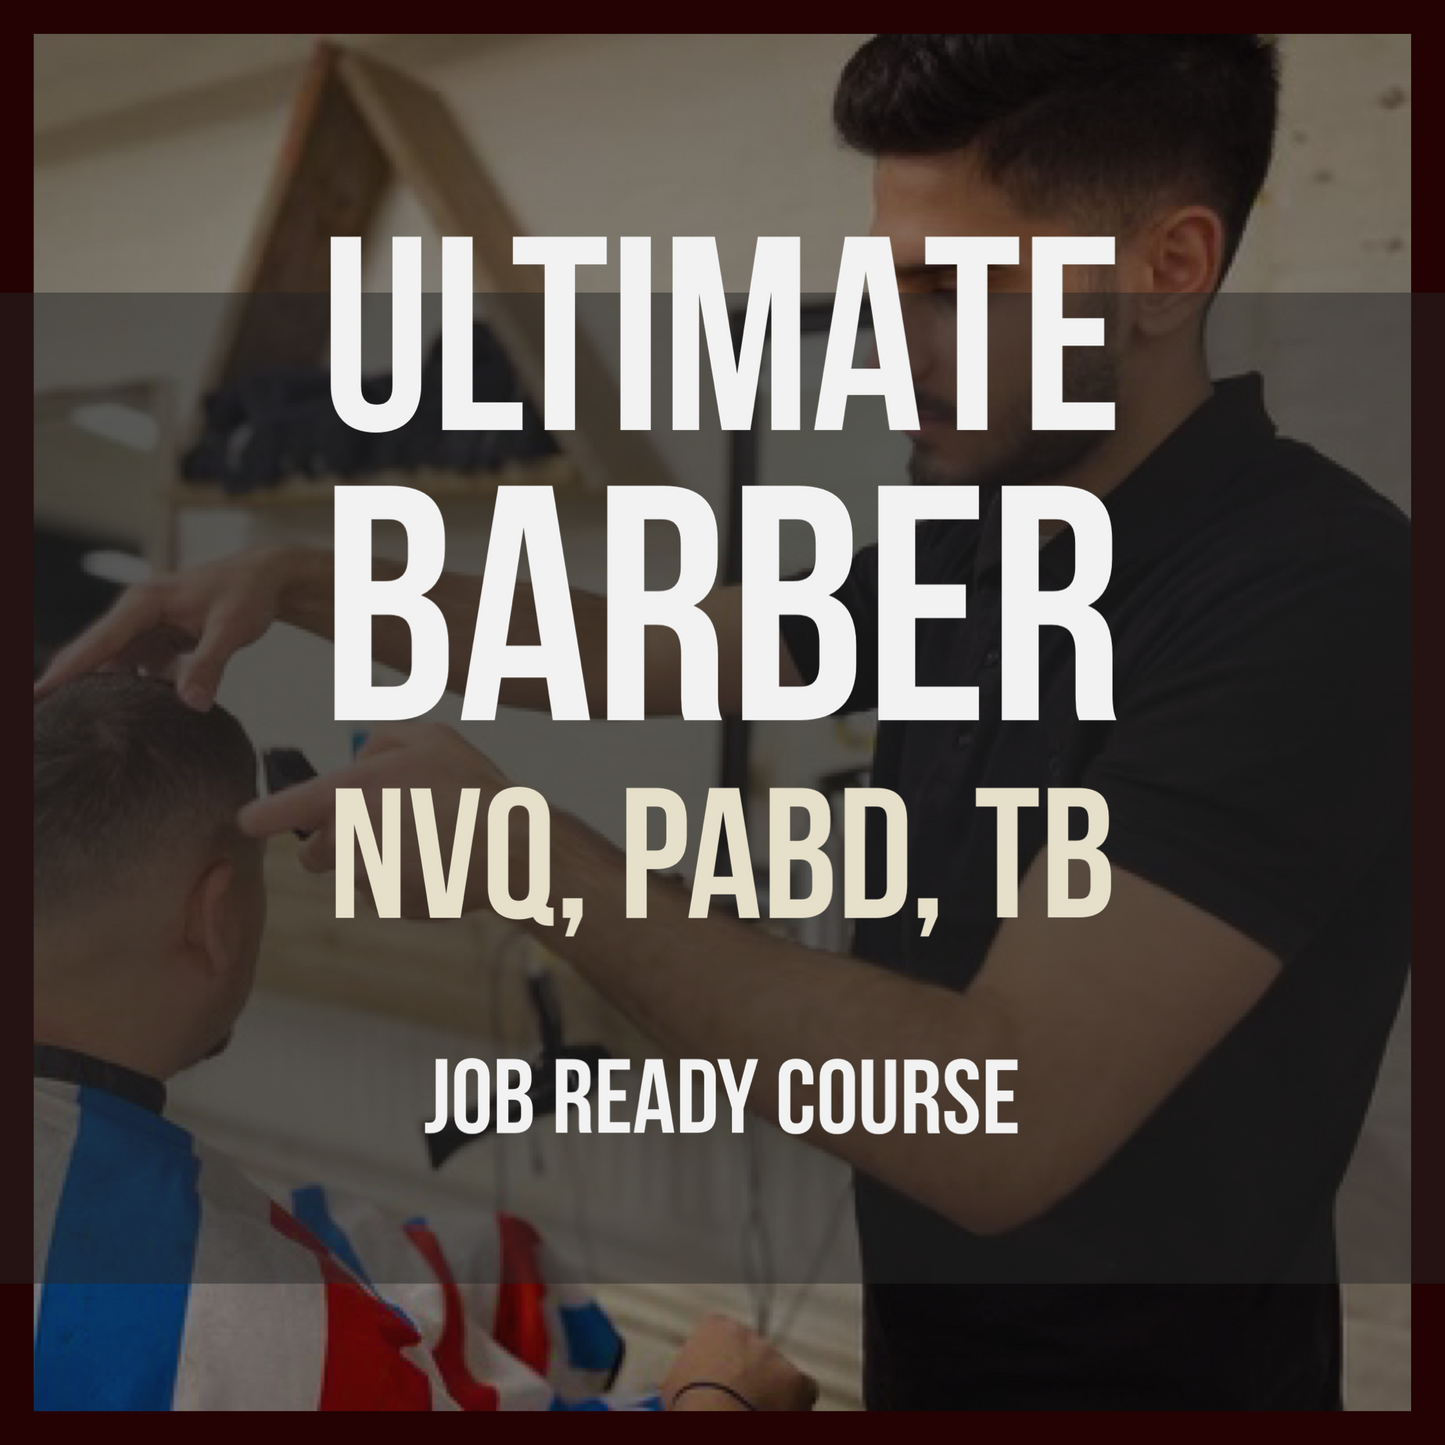 12 Weeks Ultra Barber Course. -  £4600